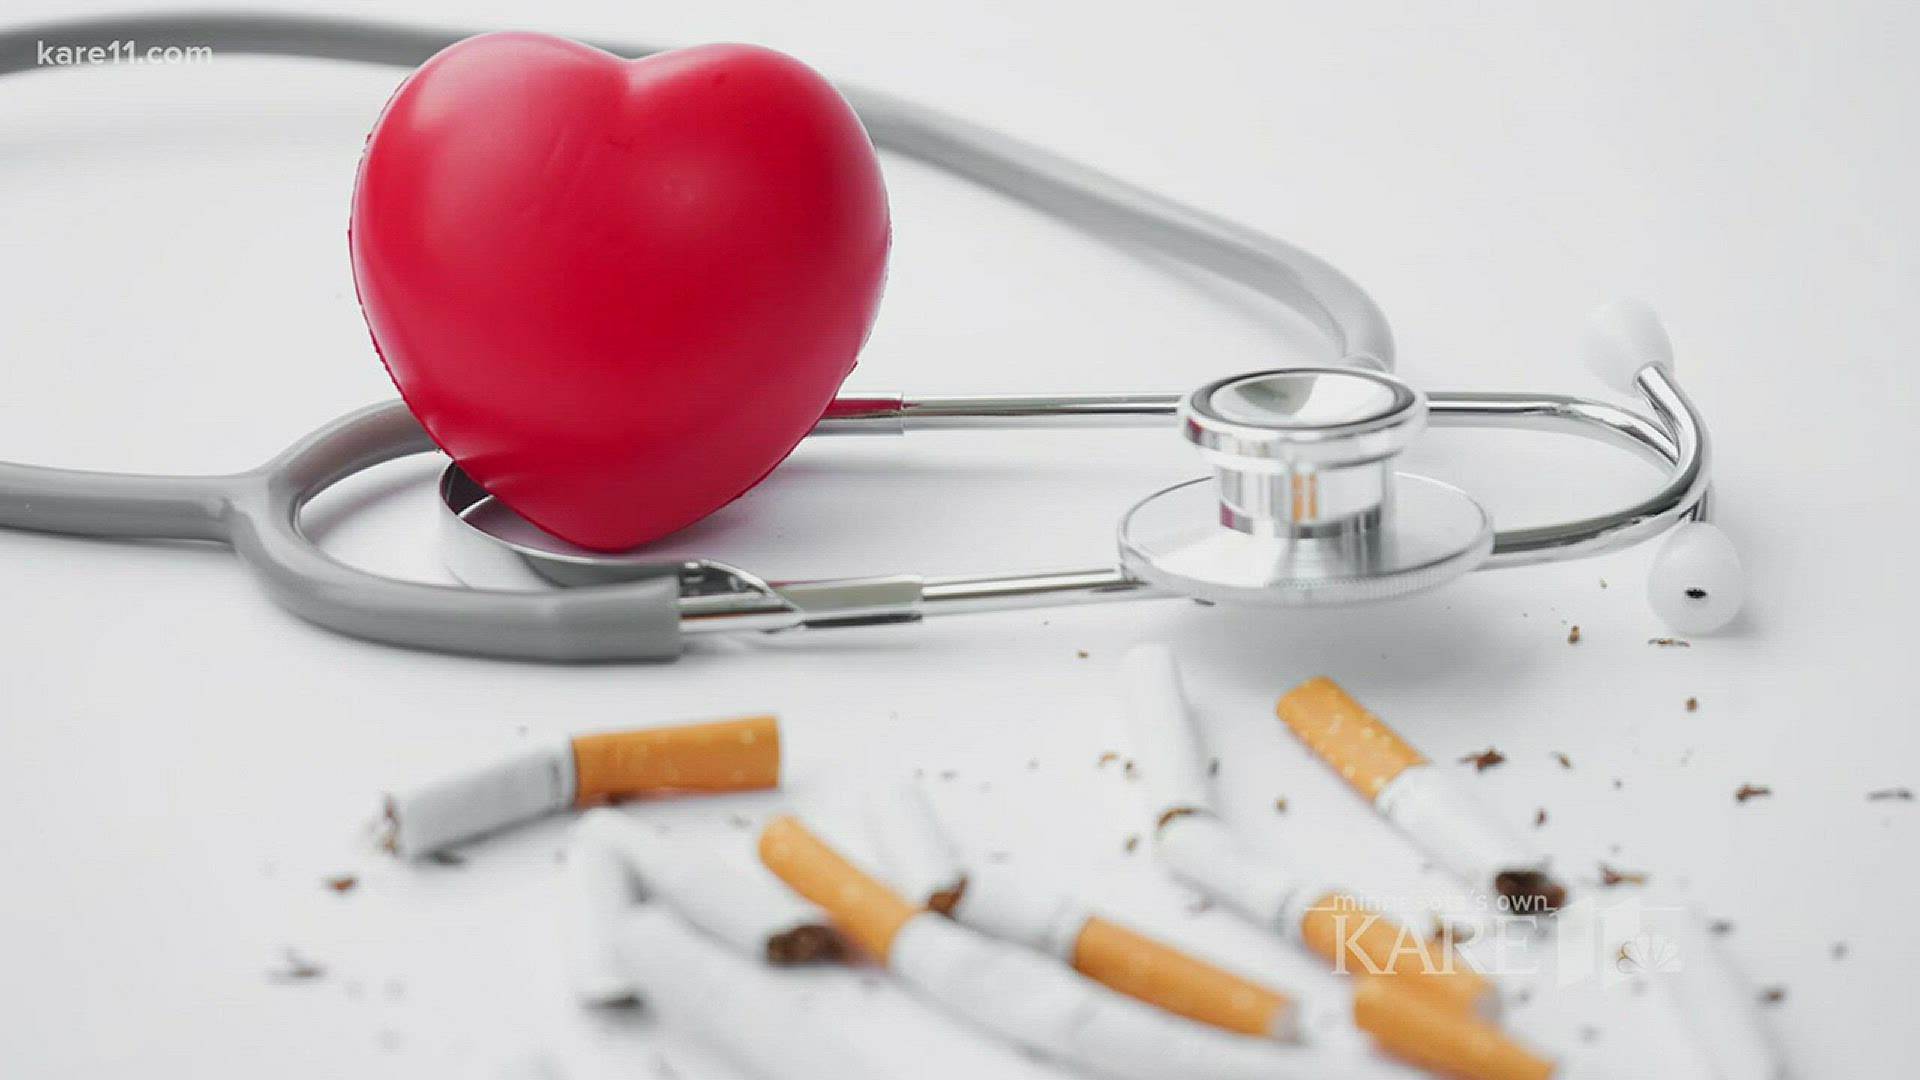 Quitting smoking is the biggest thing a smoker can do to improve their health. http://kare11.tv/2oowpT3